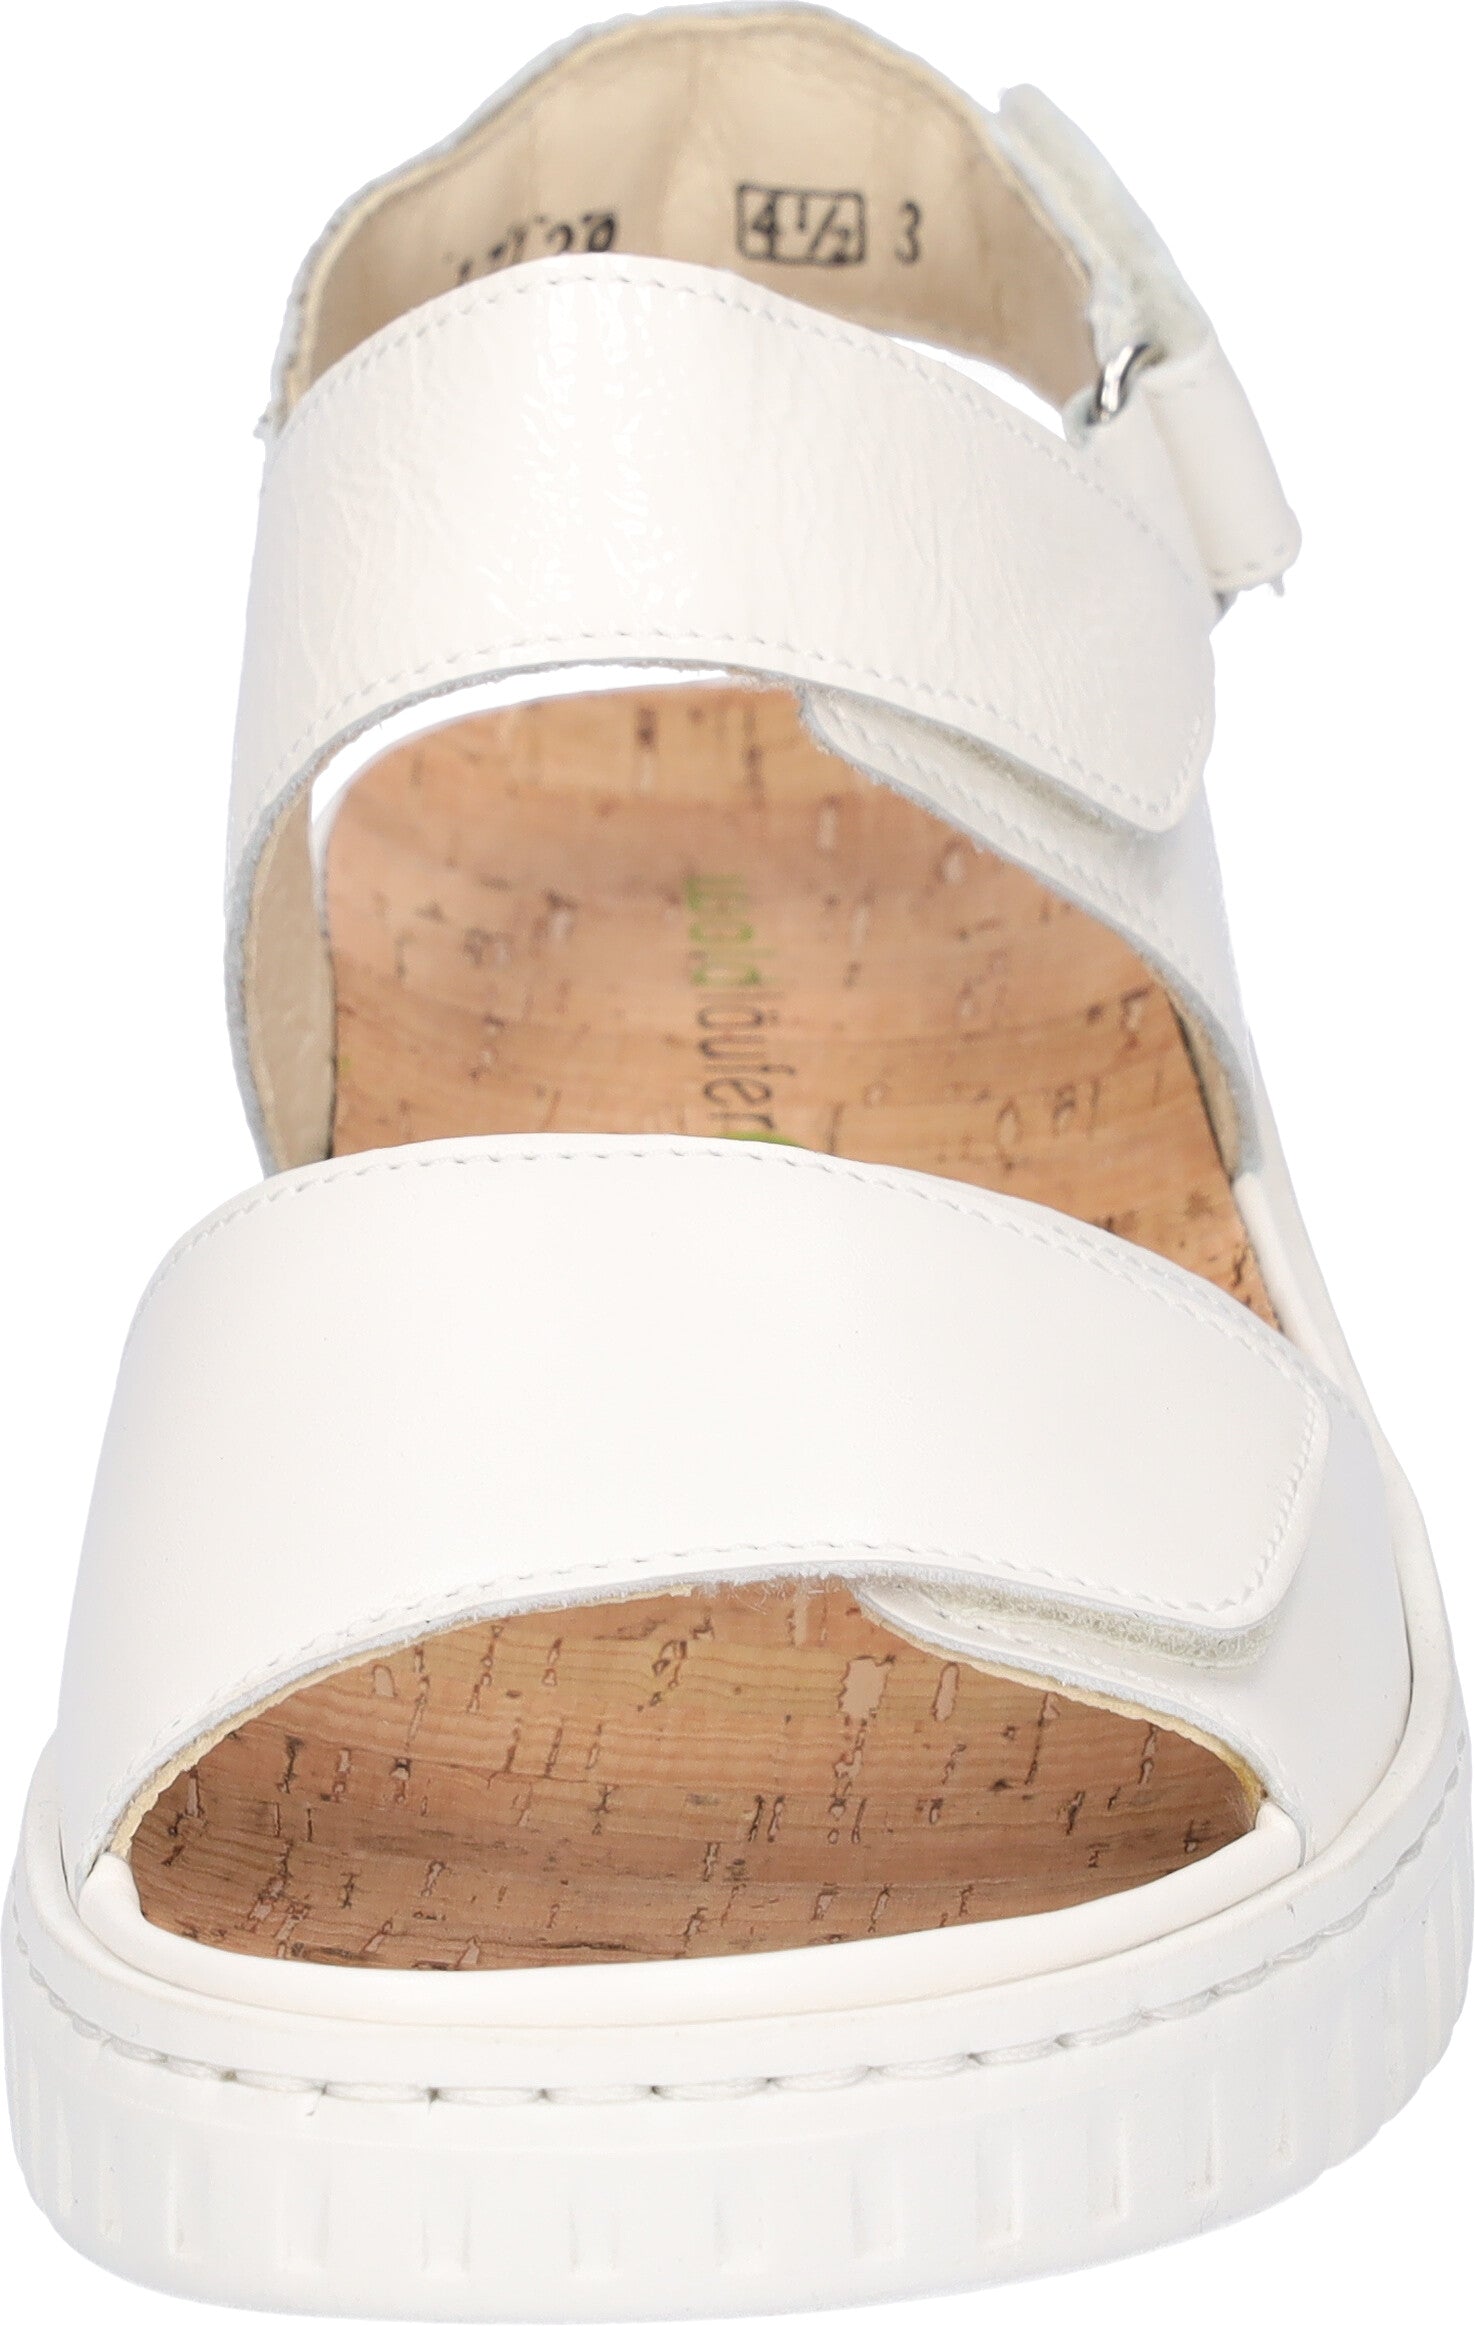 Waldlaufer 955001 201 148 H-Willow Ladies Off White Patent Leather Arch Support Touch Fastening Sandals